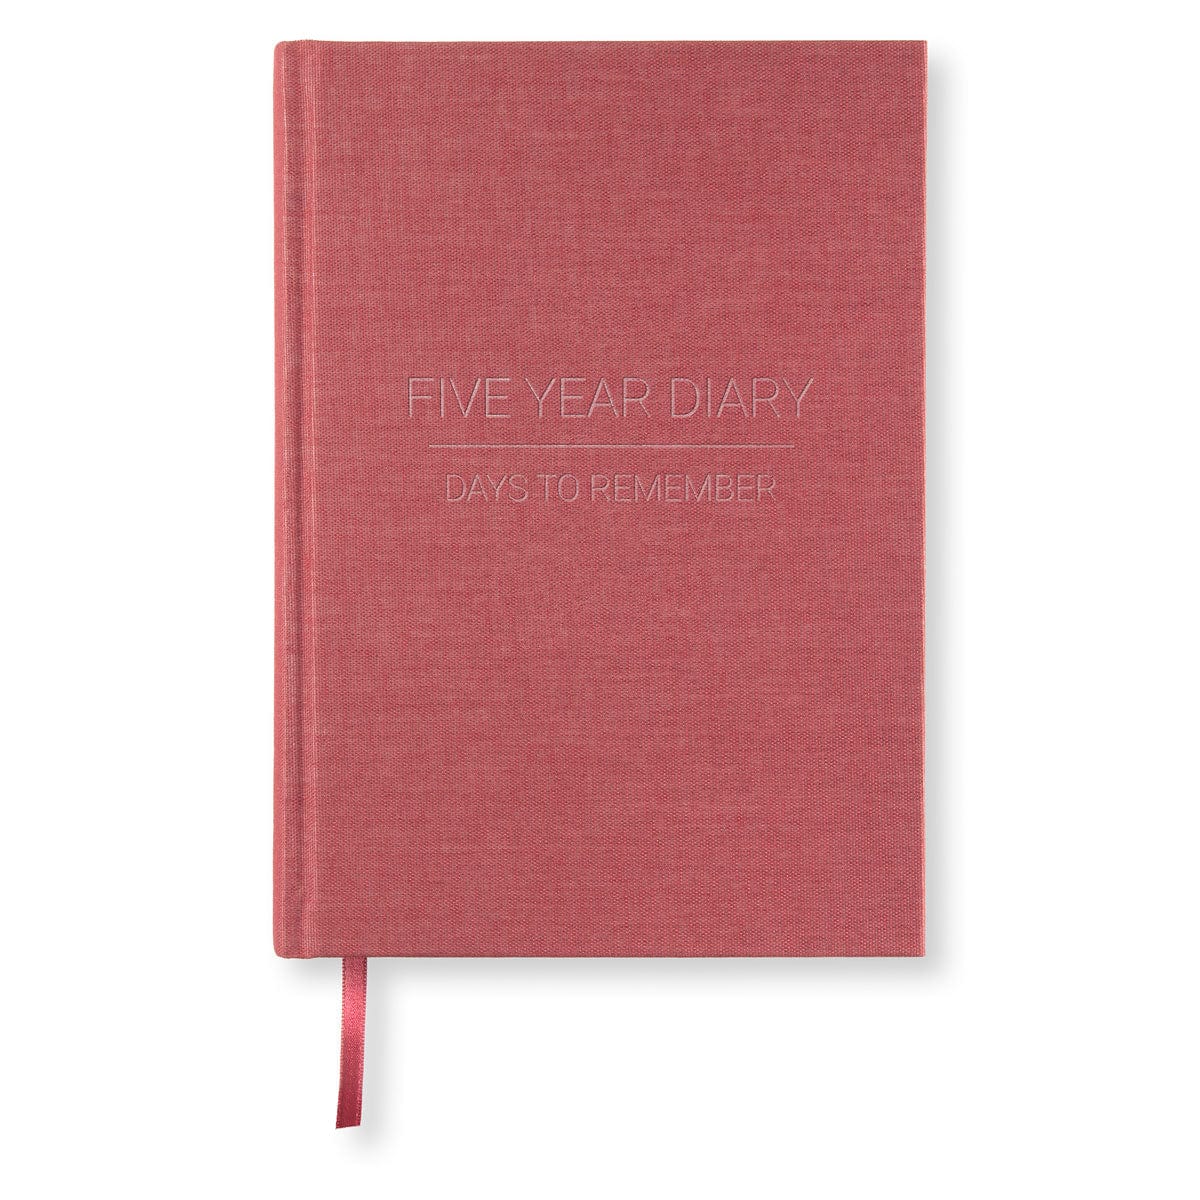 PaperStyle Paperstyle FIVE YEAR DIARY A5 Red Twist